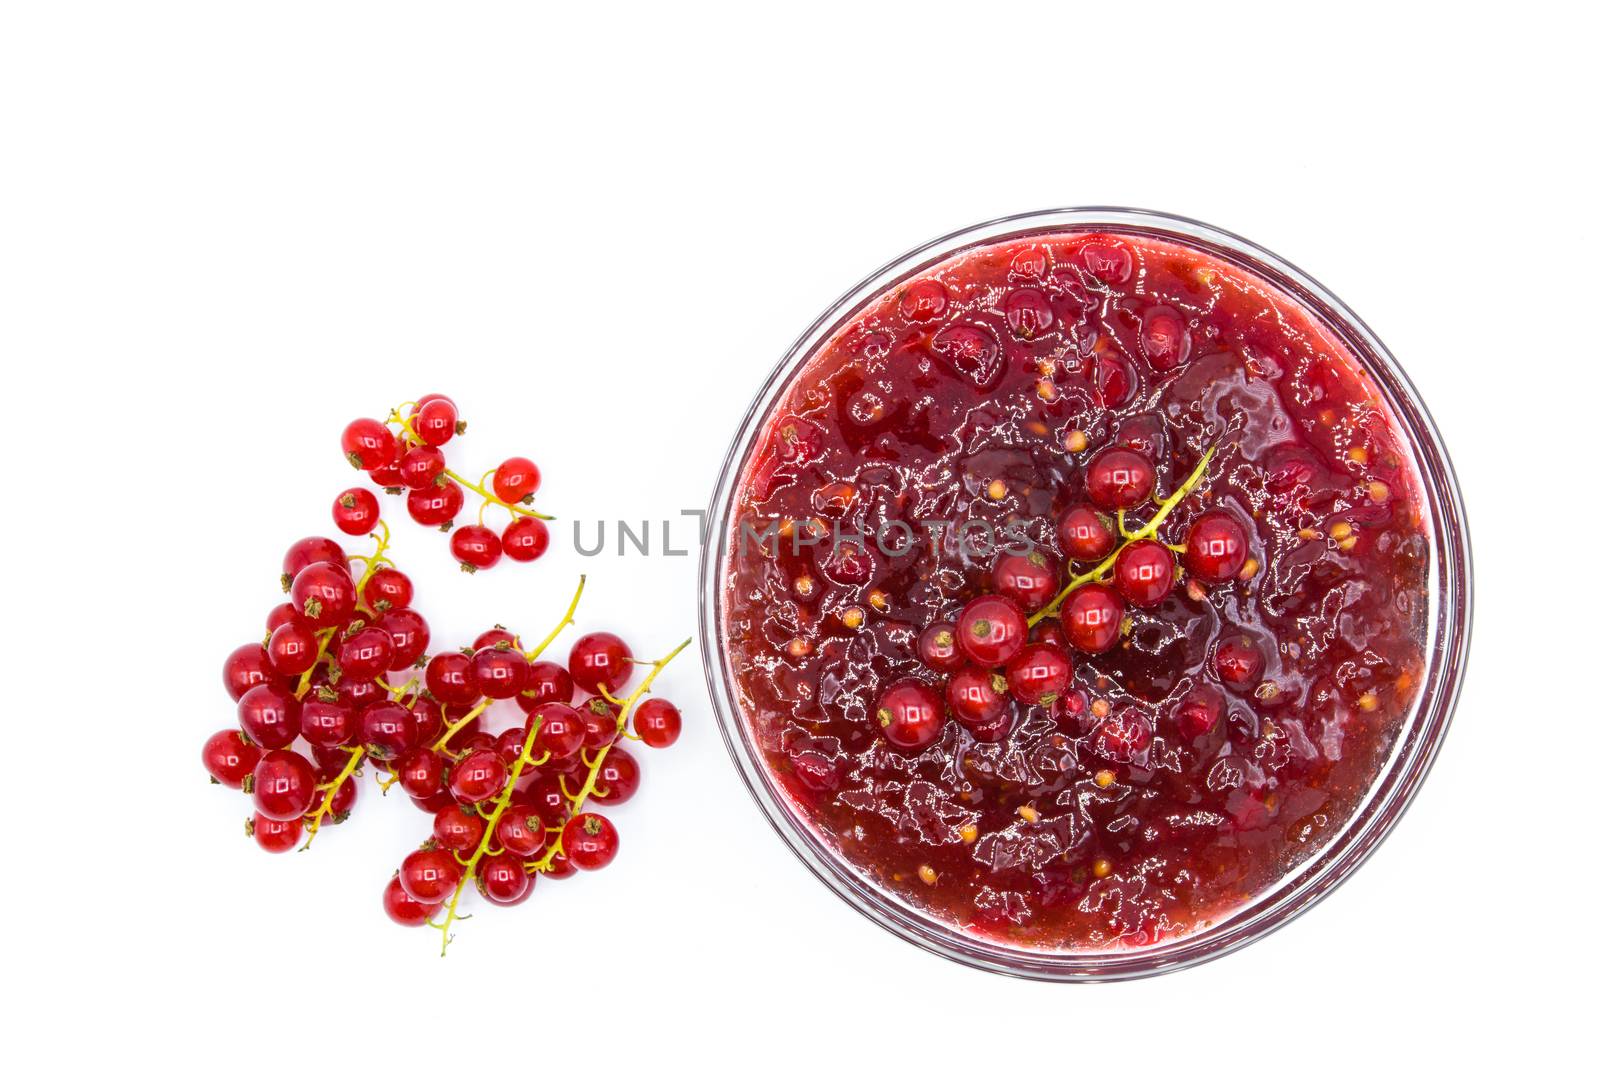 Cranberry sauce in bowl for Thanksgiving dinner isolated on white background by chandlervid85